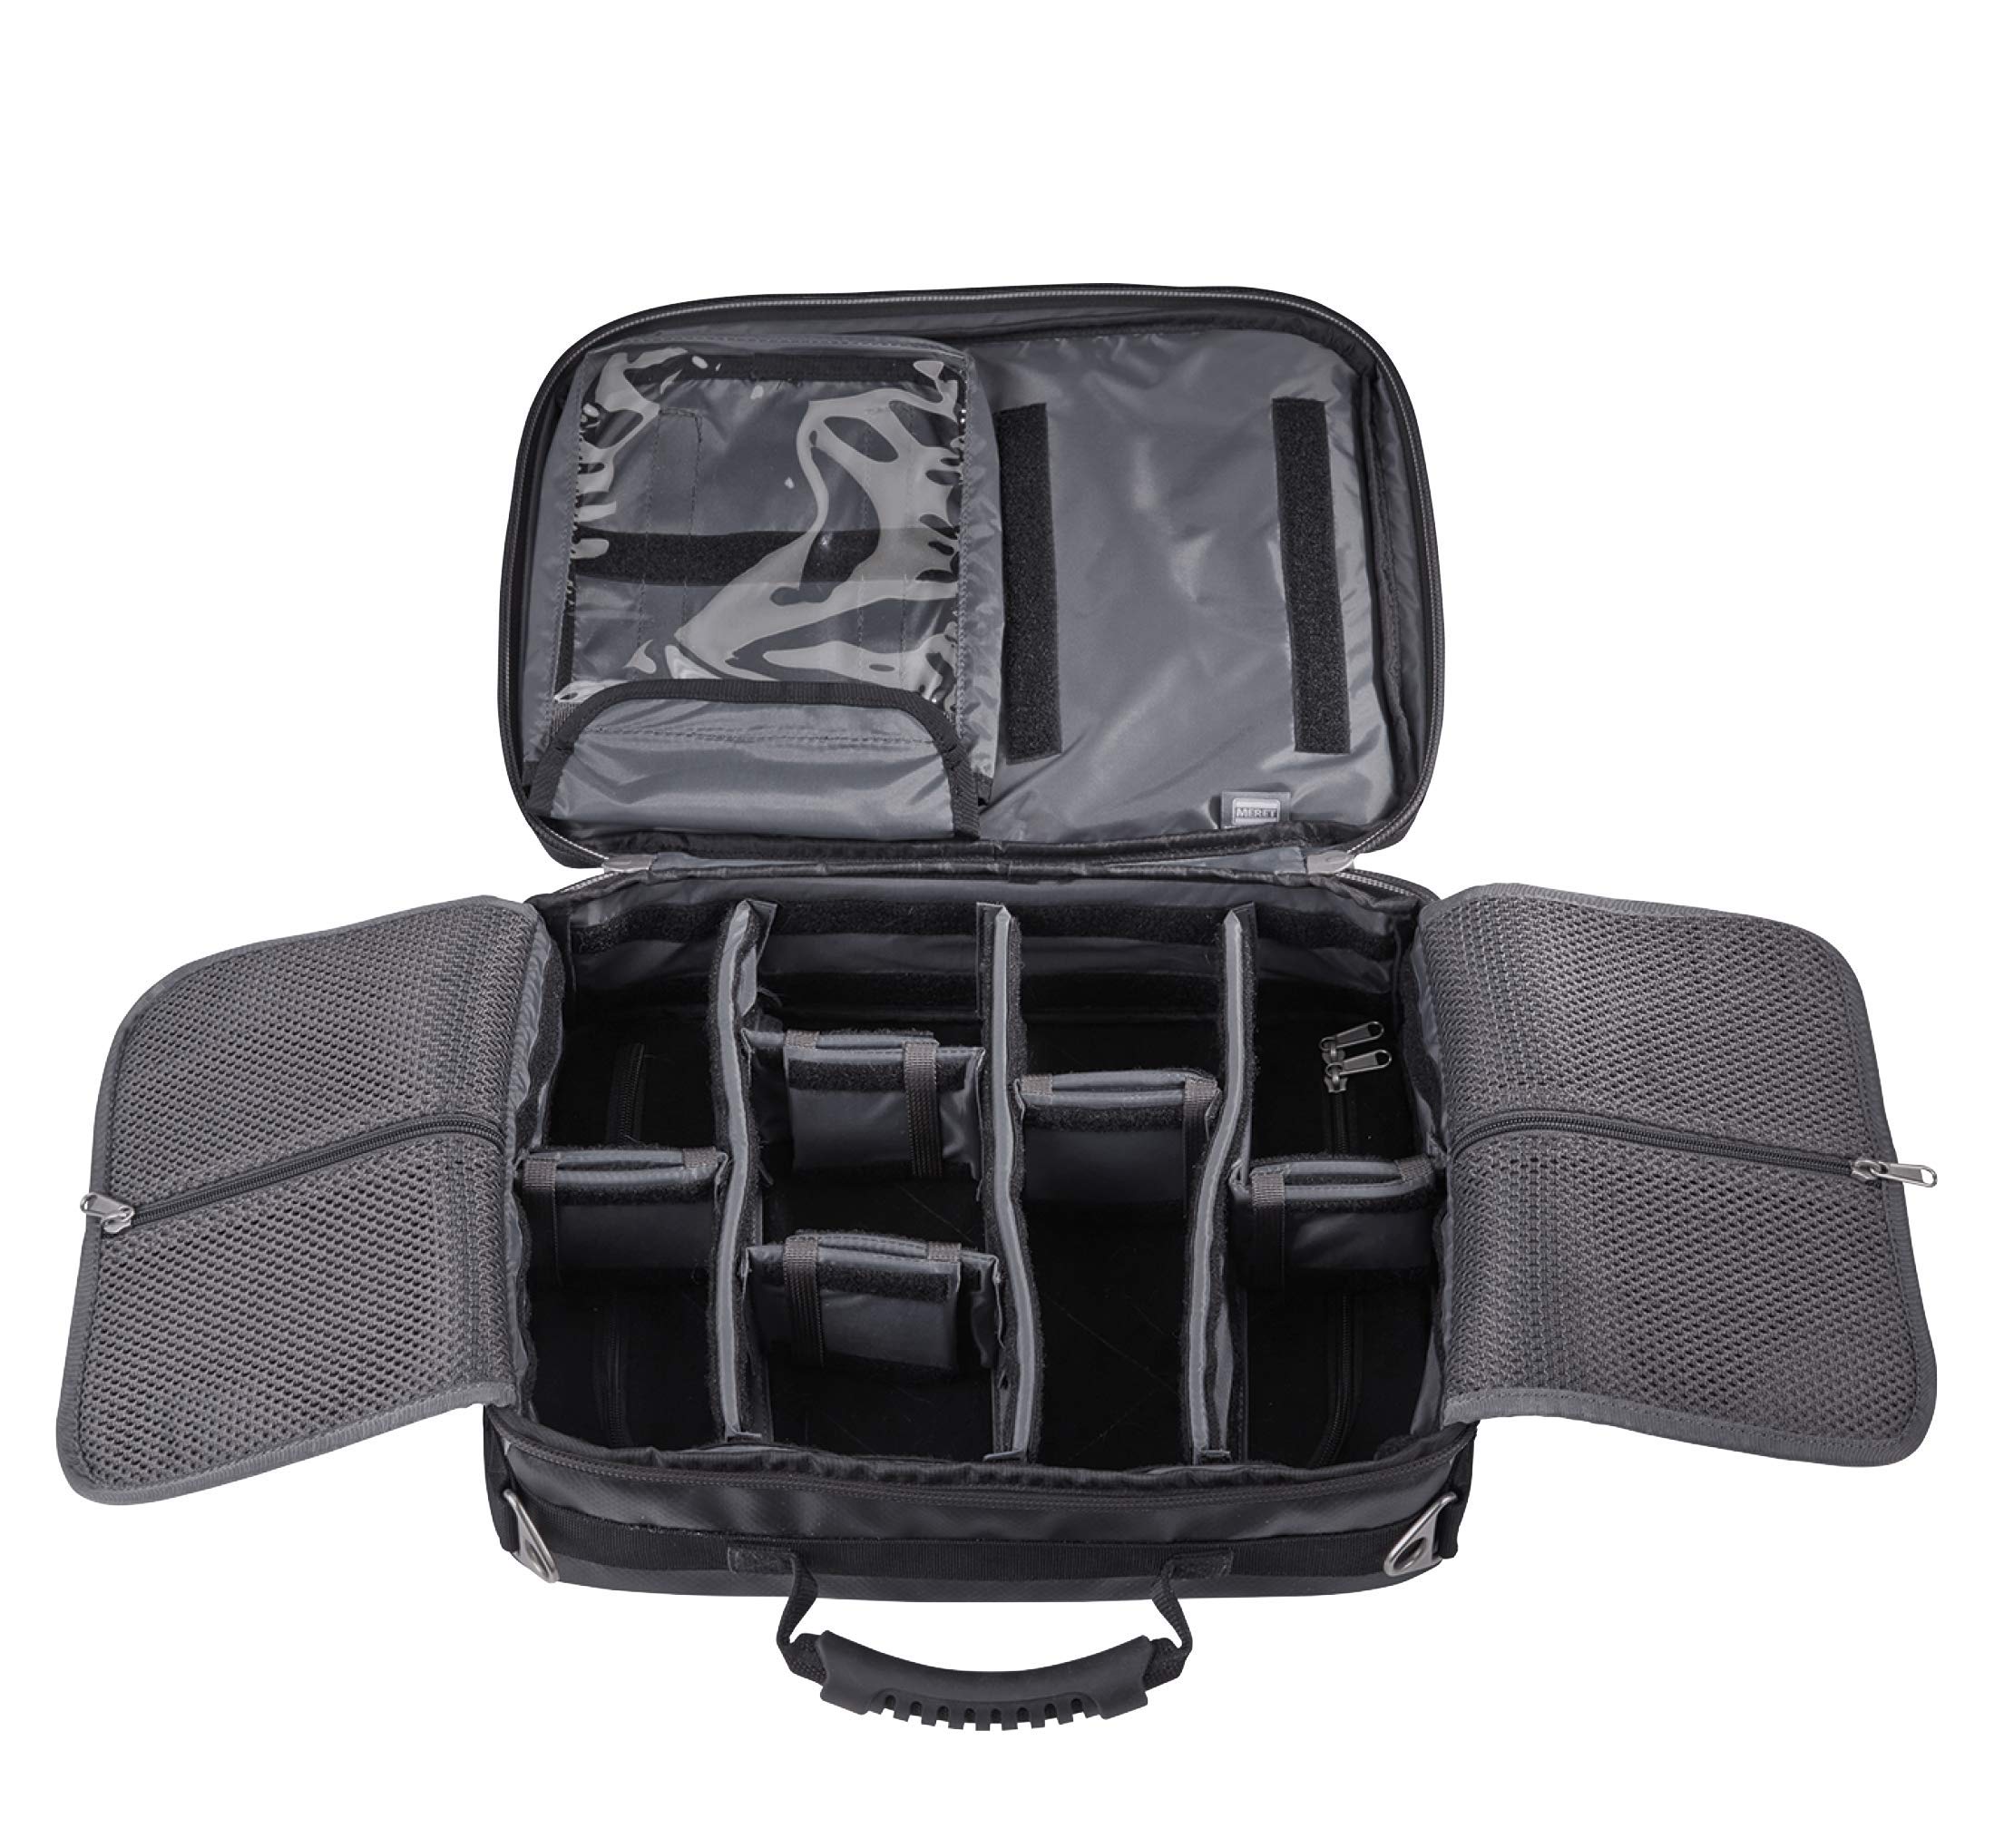 Mueller Medi Kit G2 Athletic Trainer Briefcase, for Men and Women, Black, One Size, 1 Pack